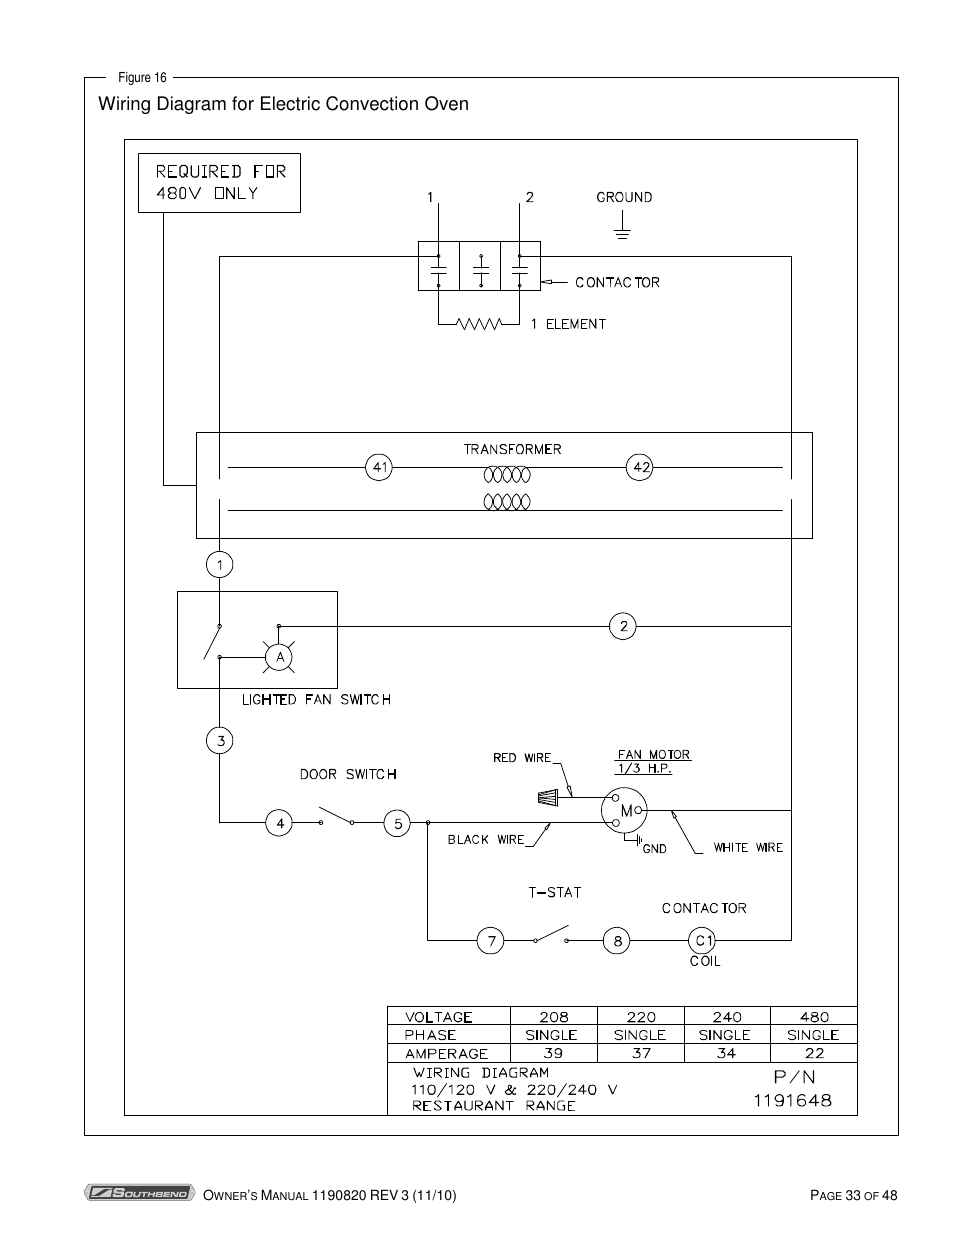 Wiring diagram for electric convection oven | Southbend 4365A User